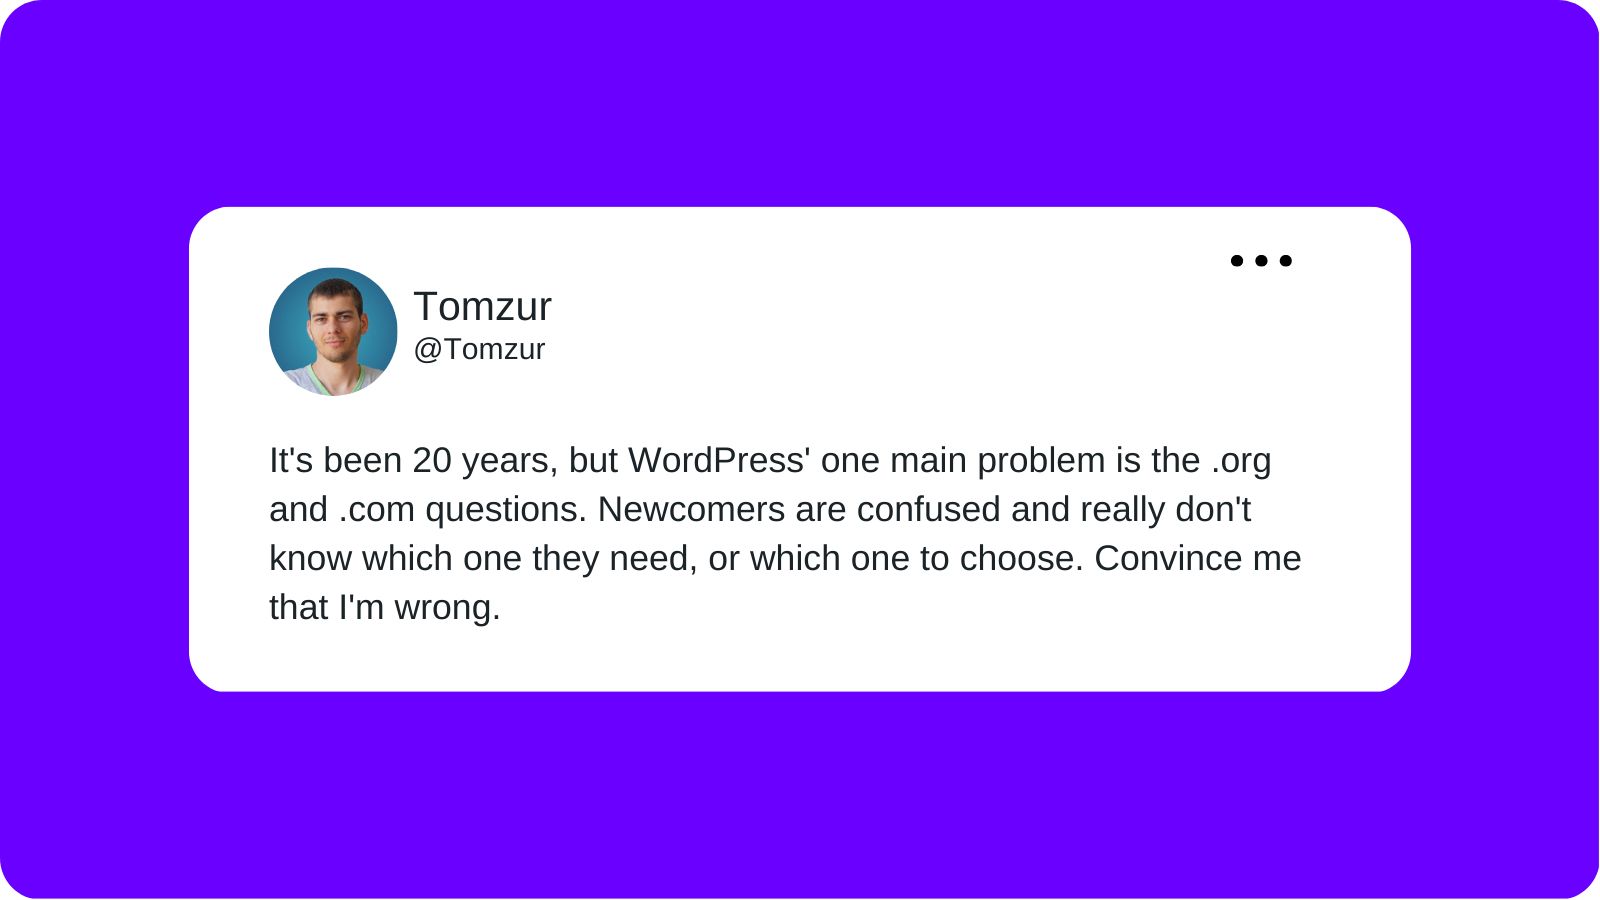 A tweet from Tomzur layered over a purple background that reads "It's been 20 years but WordPress' one main problem is the .org and .com questions. Newcomers are confused and really don't know which one they need, or which one to choose. Convince me that I'm wrong."